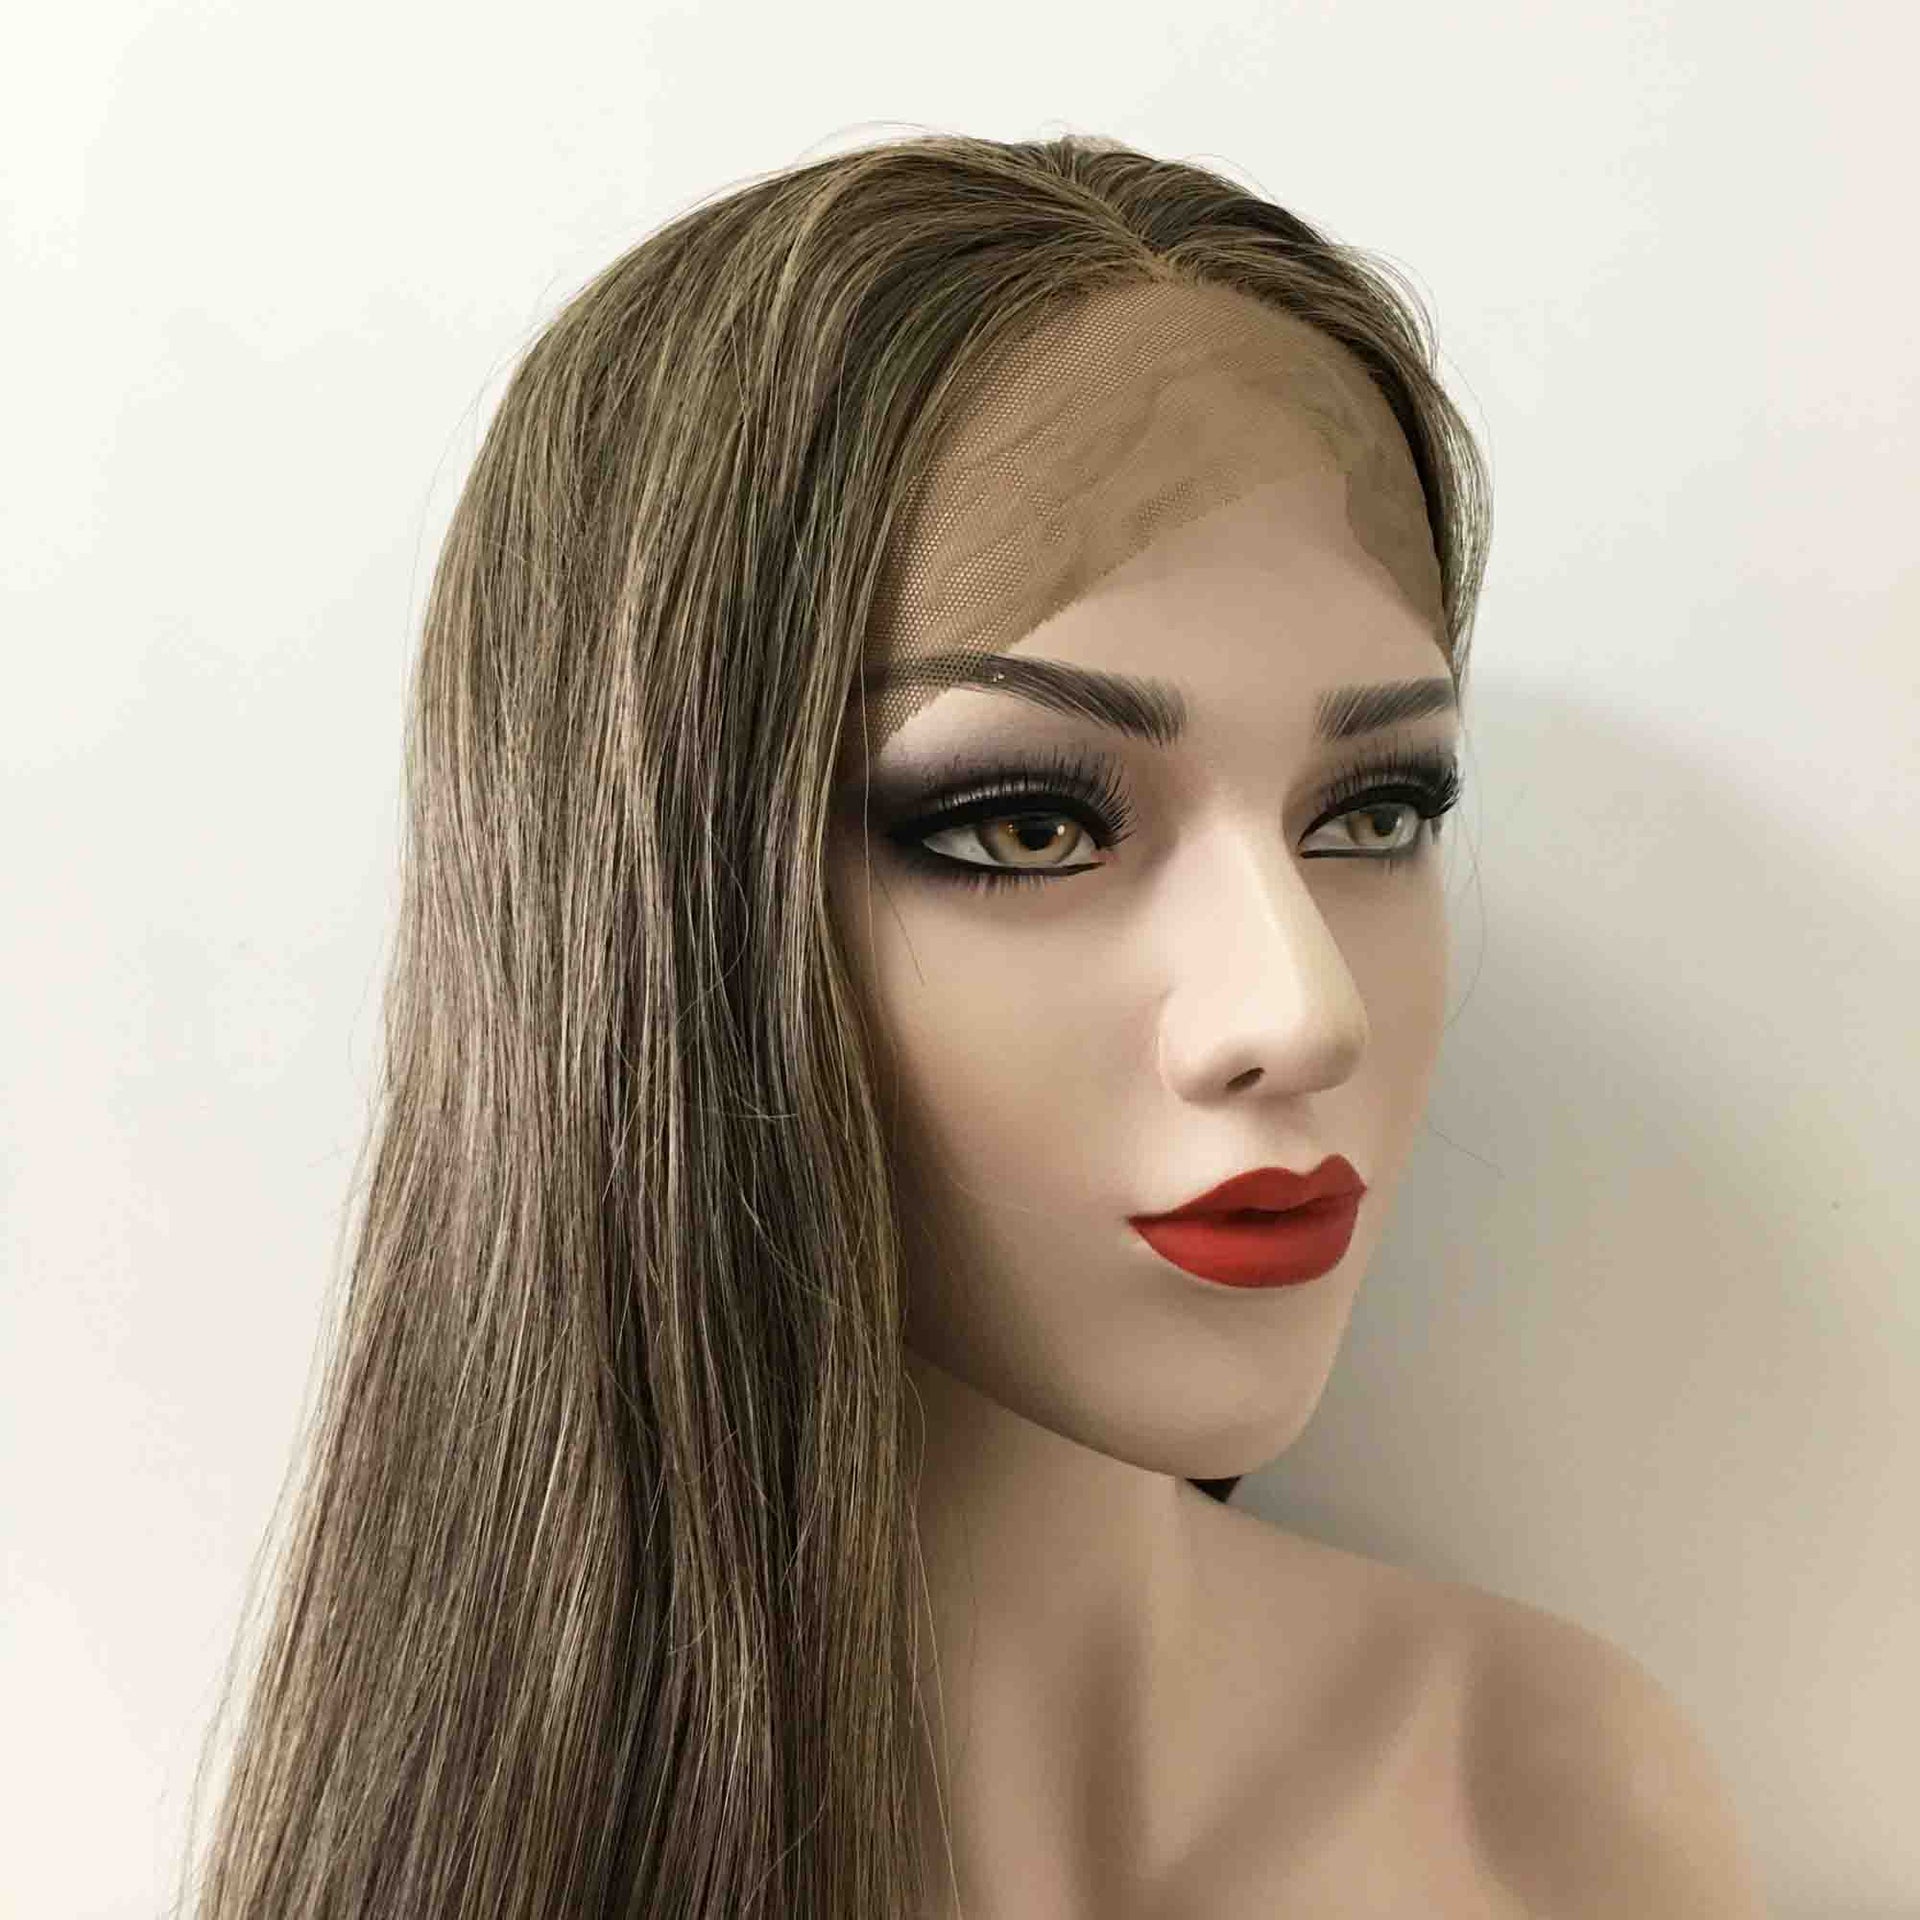 nevermindyrhead Women Lace Front Very Dark Brown Ash Blonde Highlight Long Straight Middle Part Wig